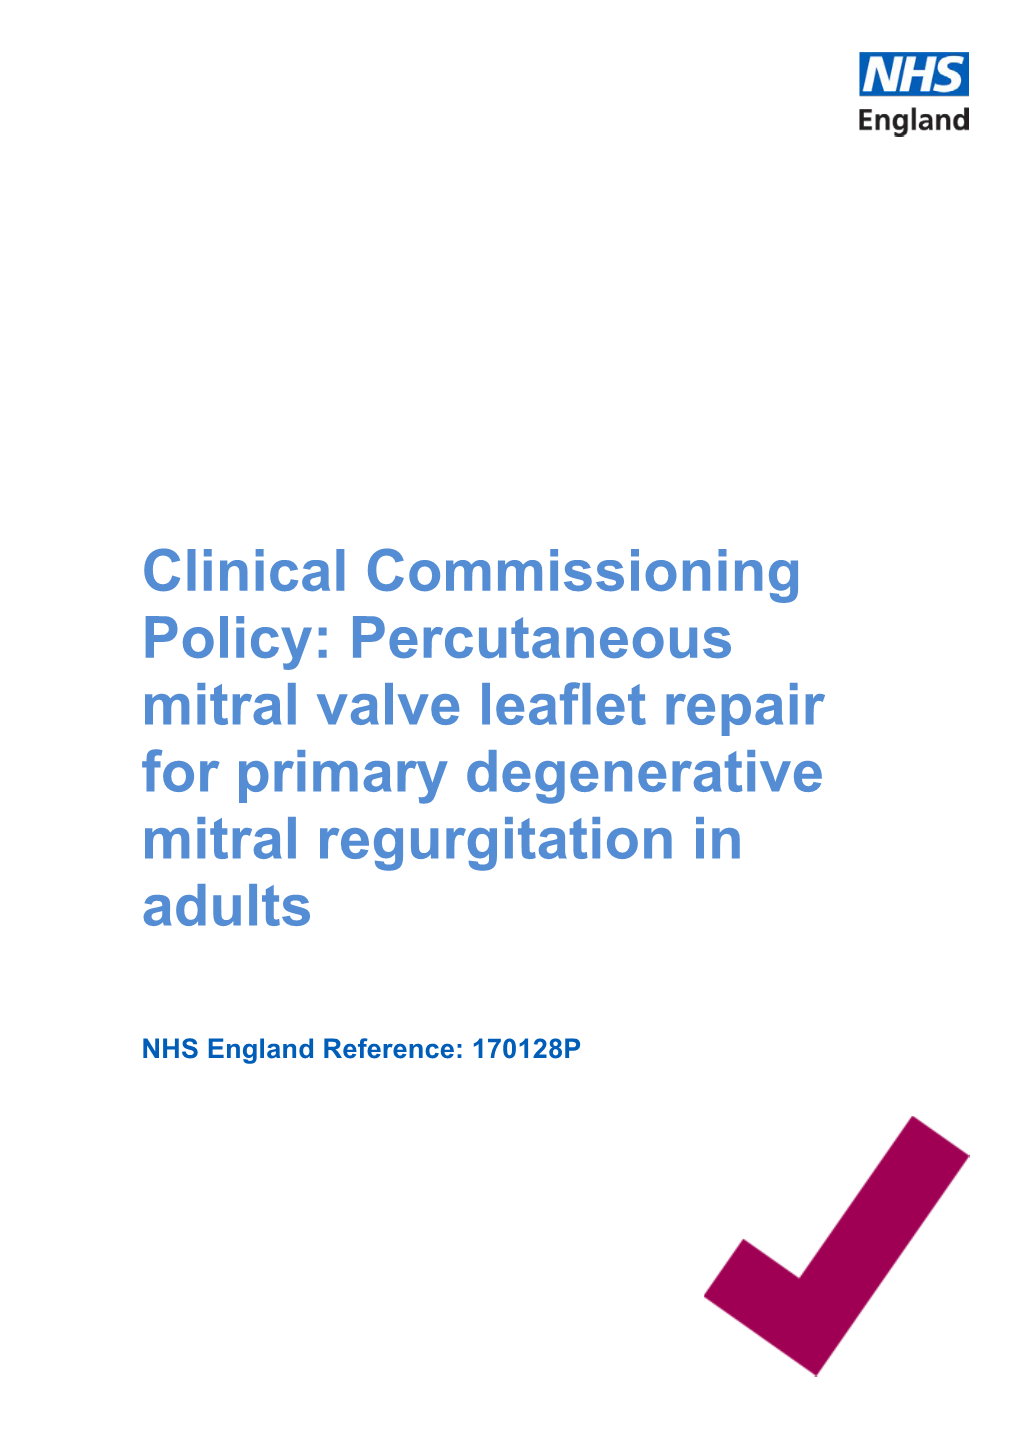 Commissioning Policy: Percutaneous Mitral Valve Leaflet Repair for Primary Degenerative Mitral Regurgitation in Adults